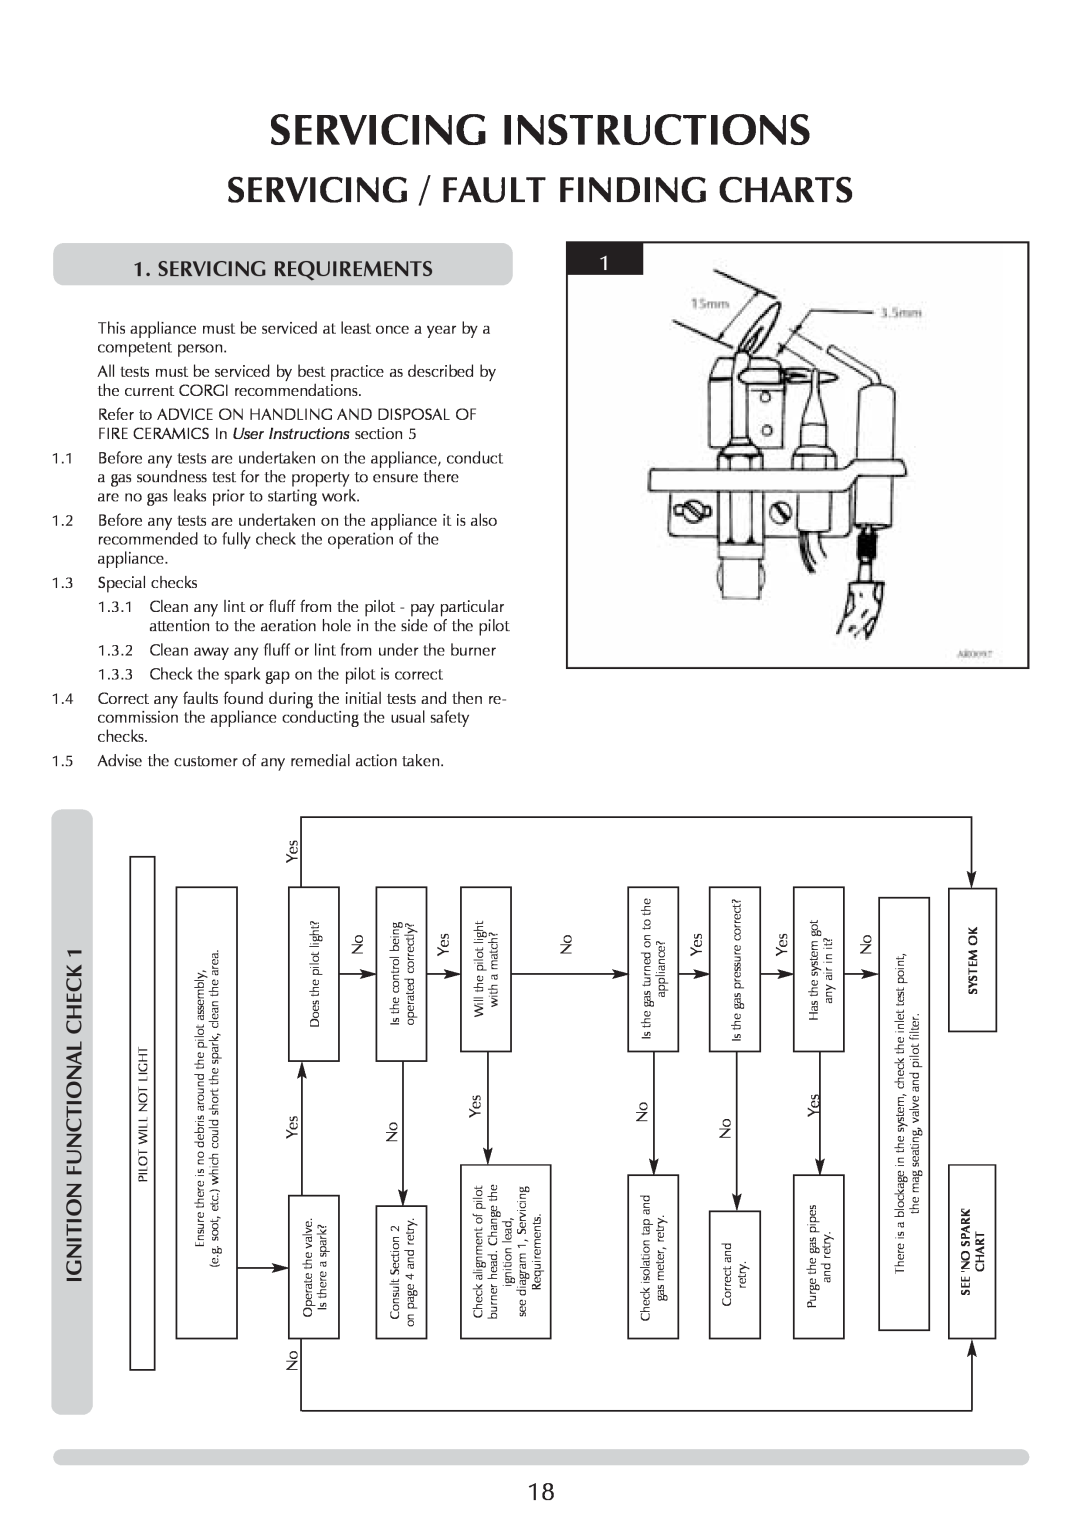 Stovax 8522-P852, CLARENDON 8541-P8541 Servicing Instructions, Servicing / Fault Finding Charts, Servicing Requirements 